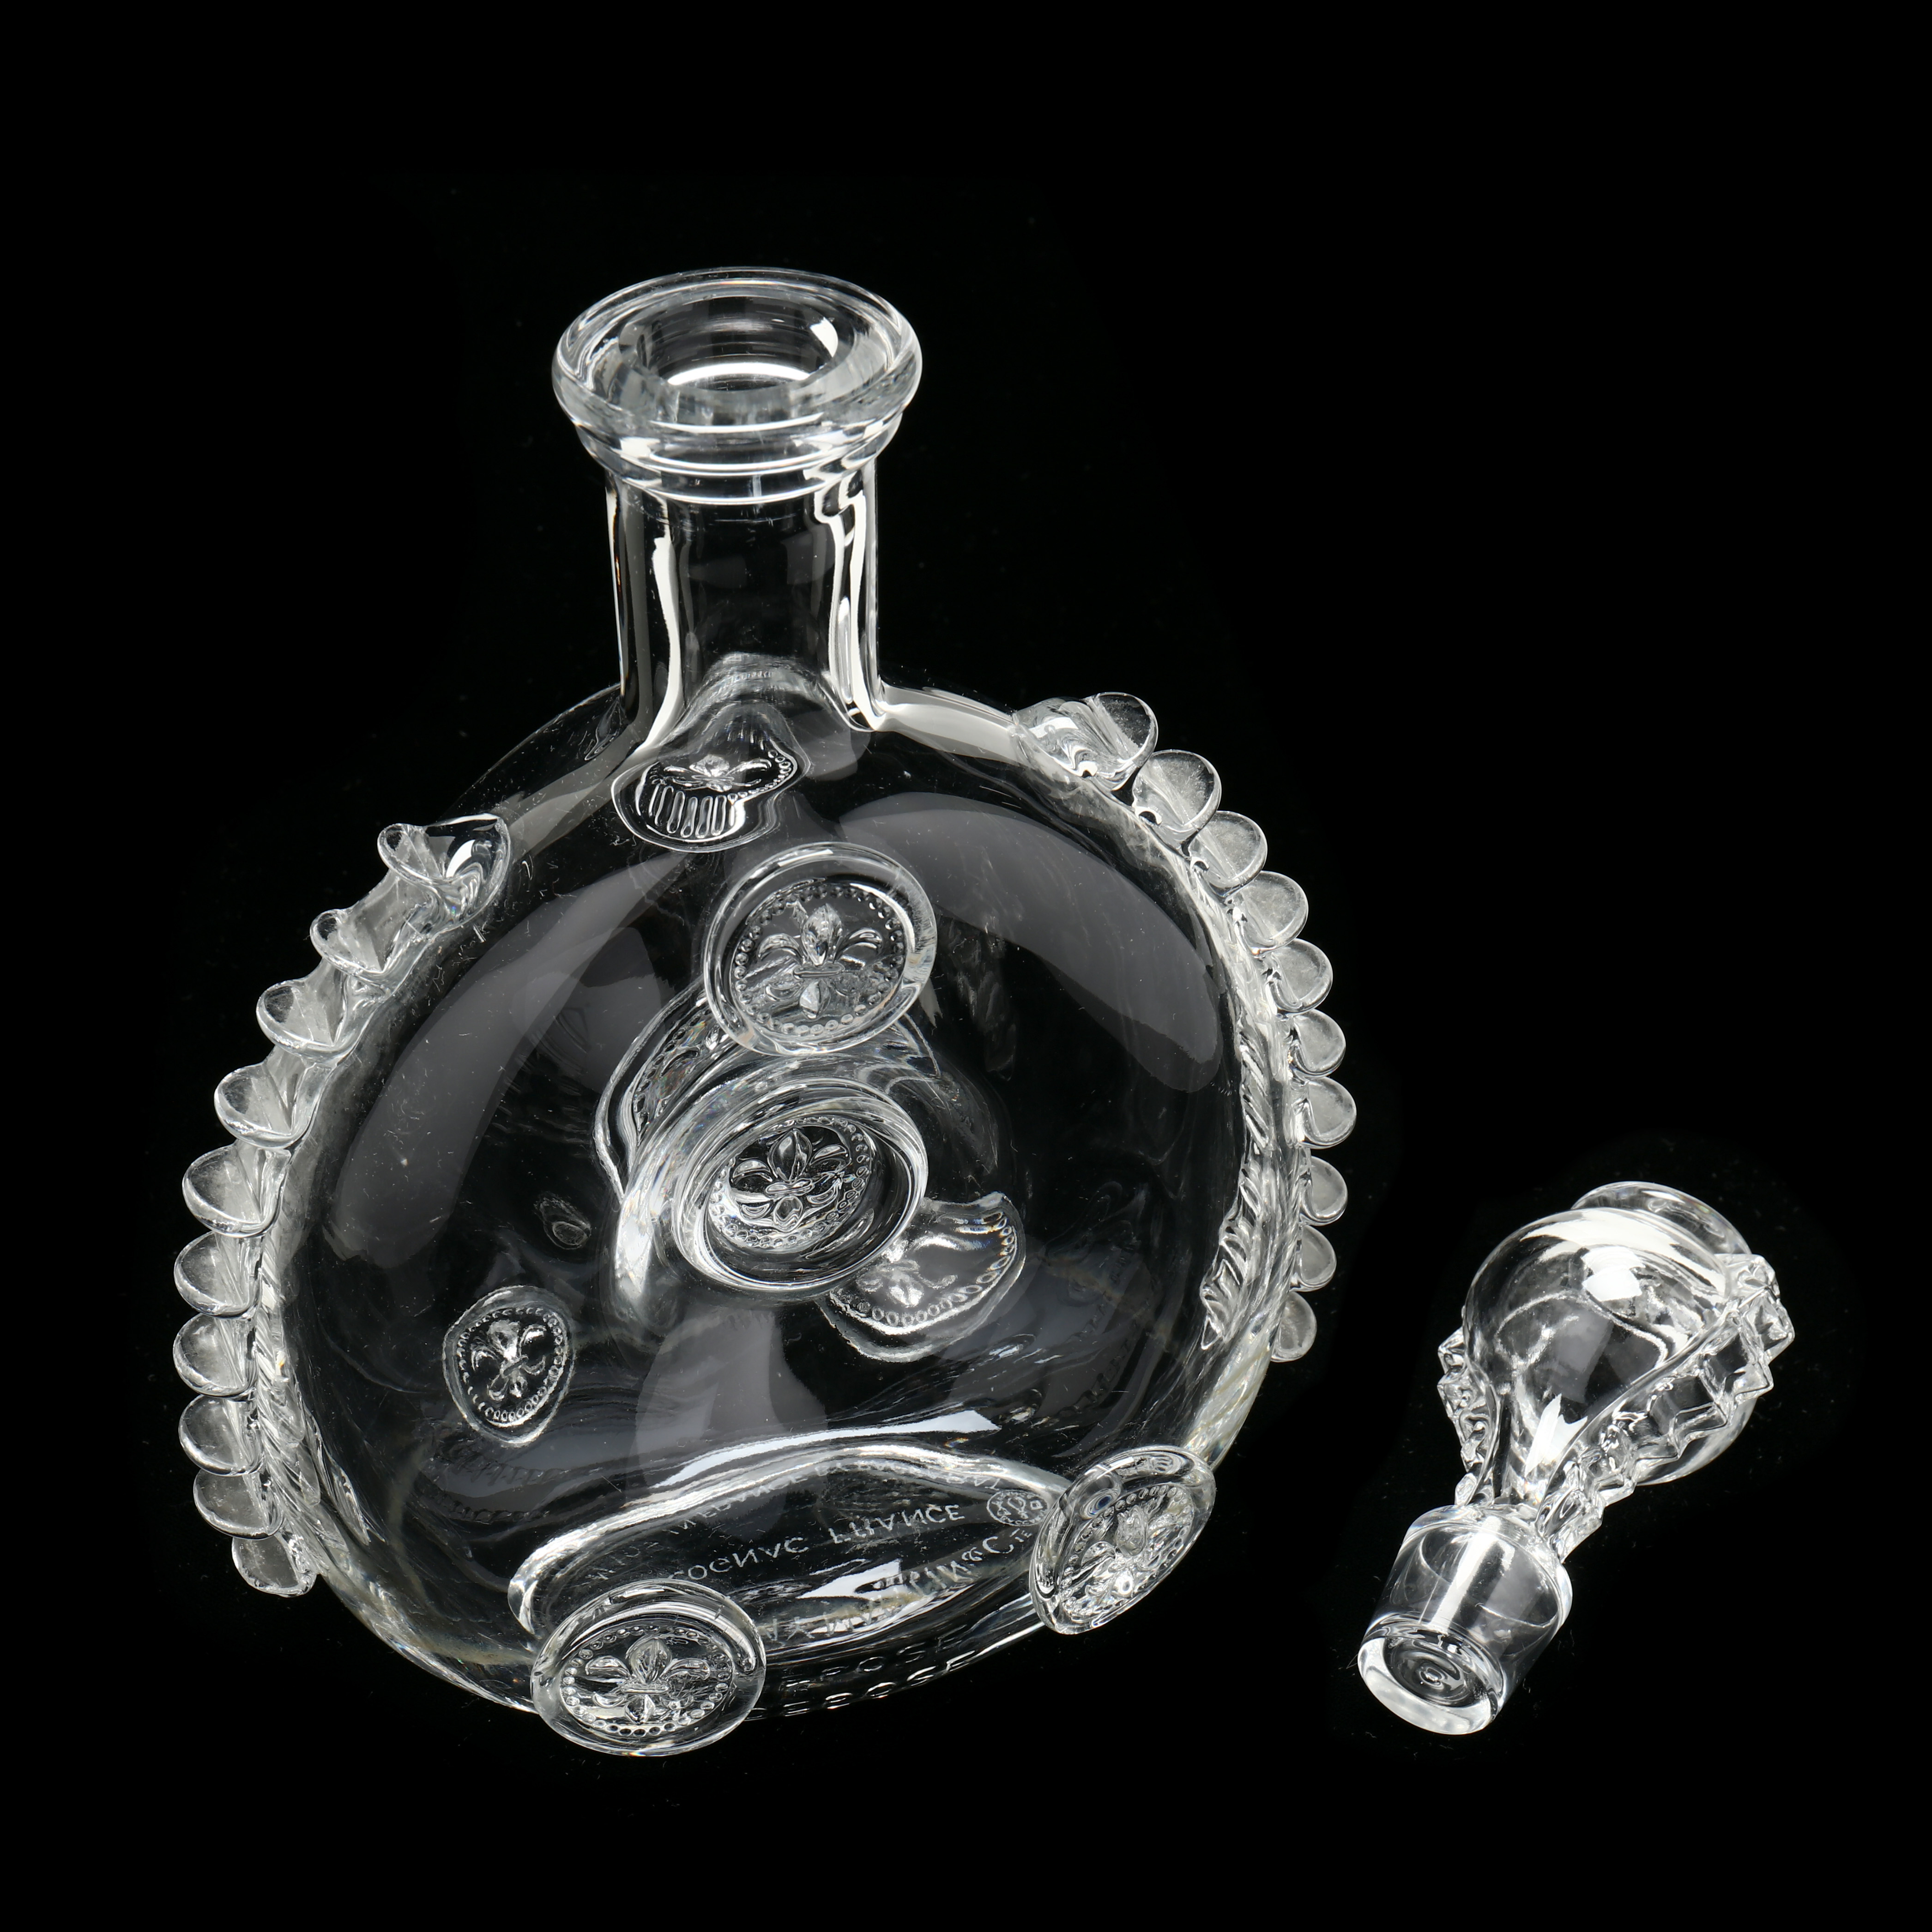 Sold at Auction: Baccarat Louis XIII Remy Martin Magnum Crystal Decanter